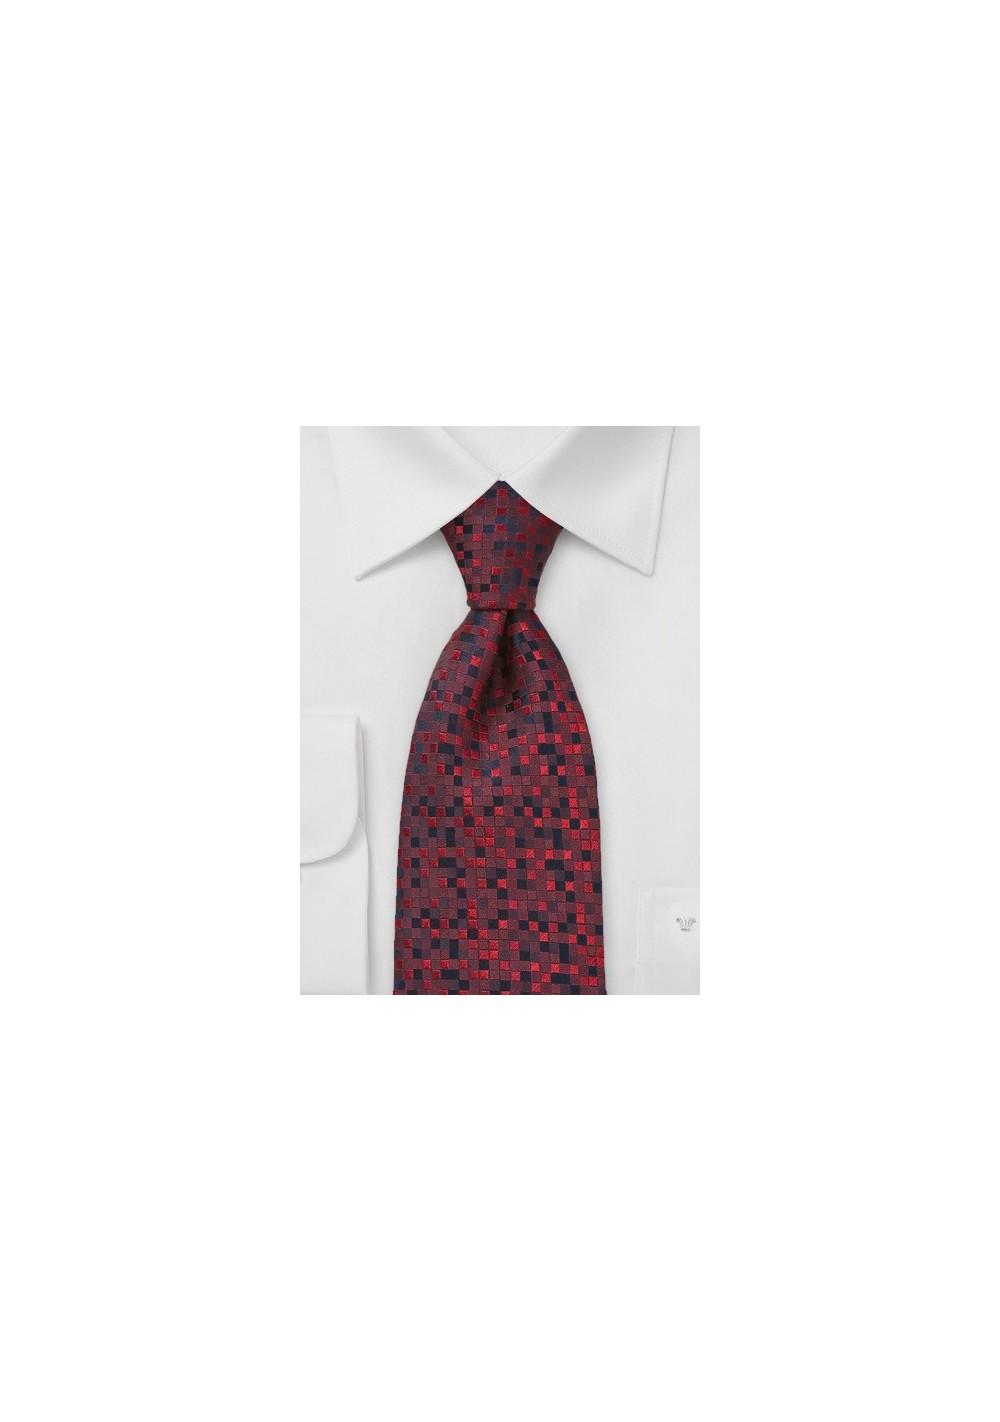 Patchwork Tie in Red and Black